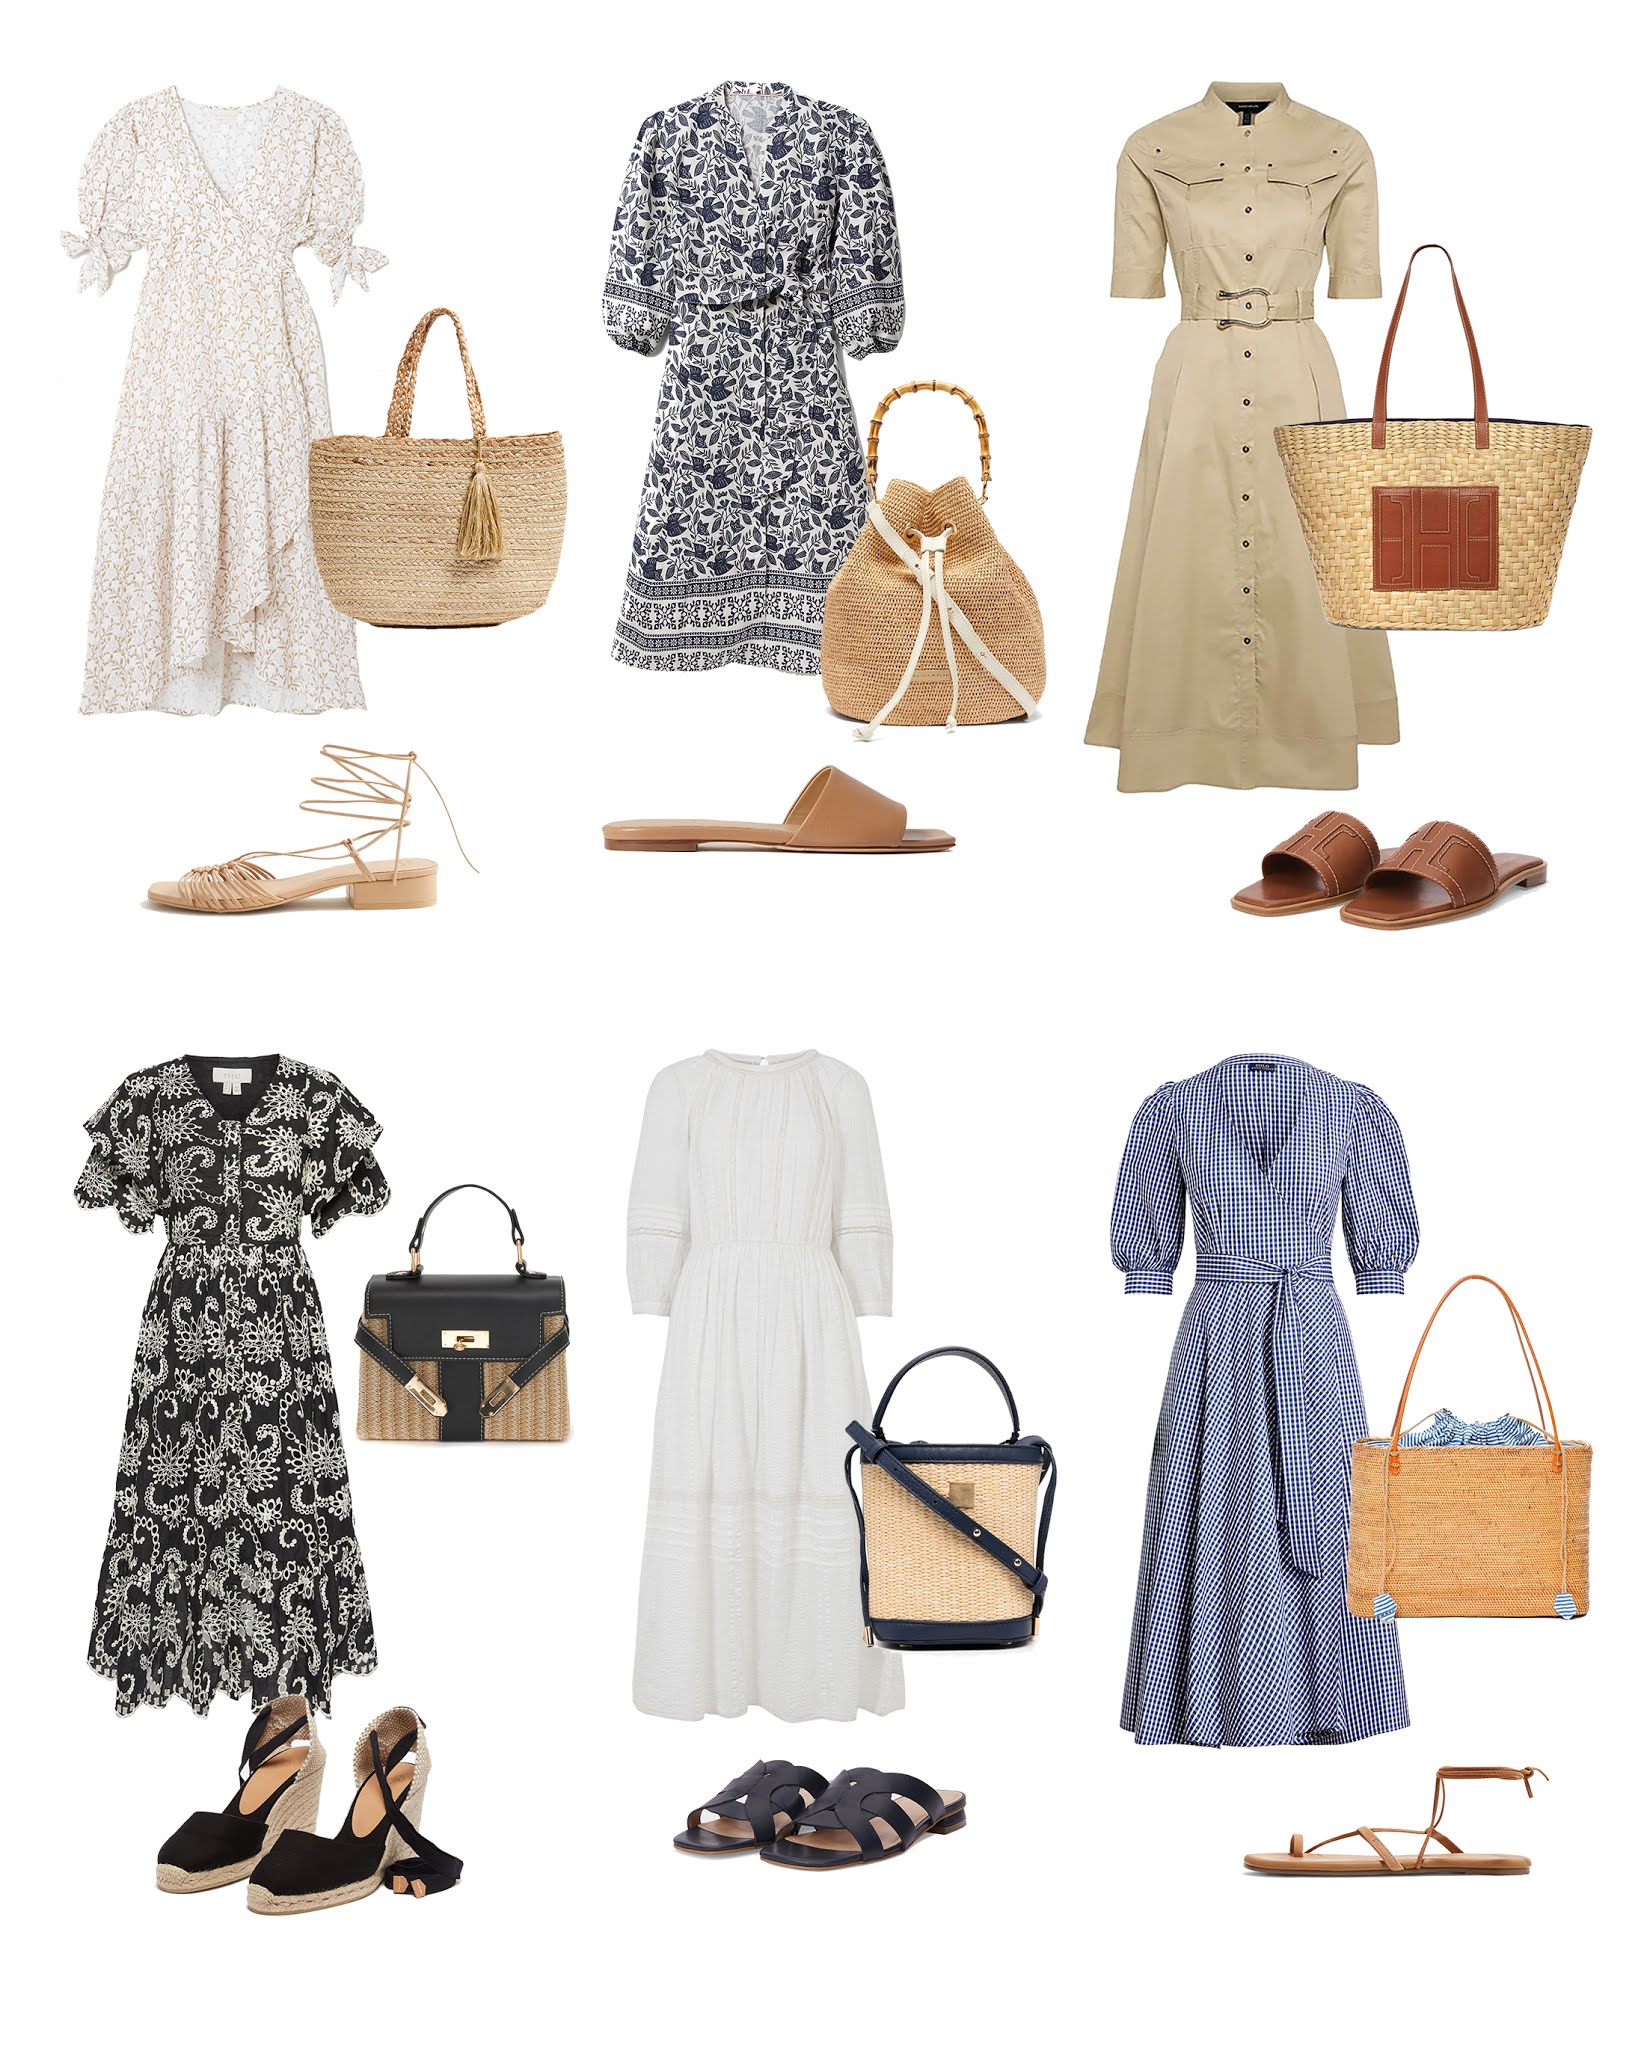 summer-dresses-classic-style-outfit-inspiration